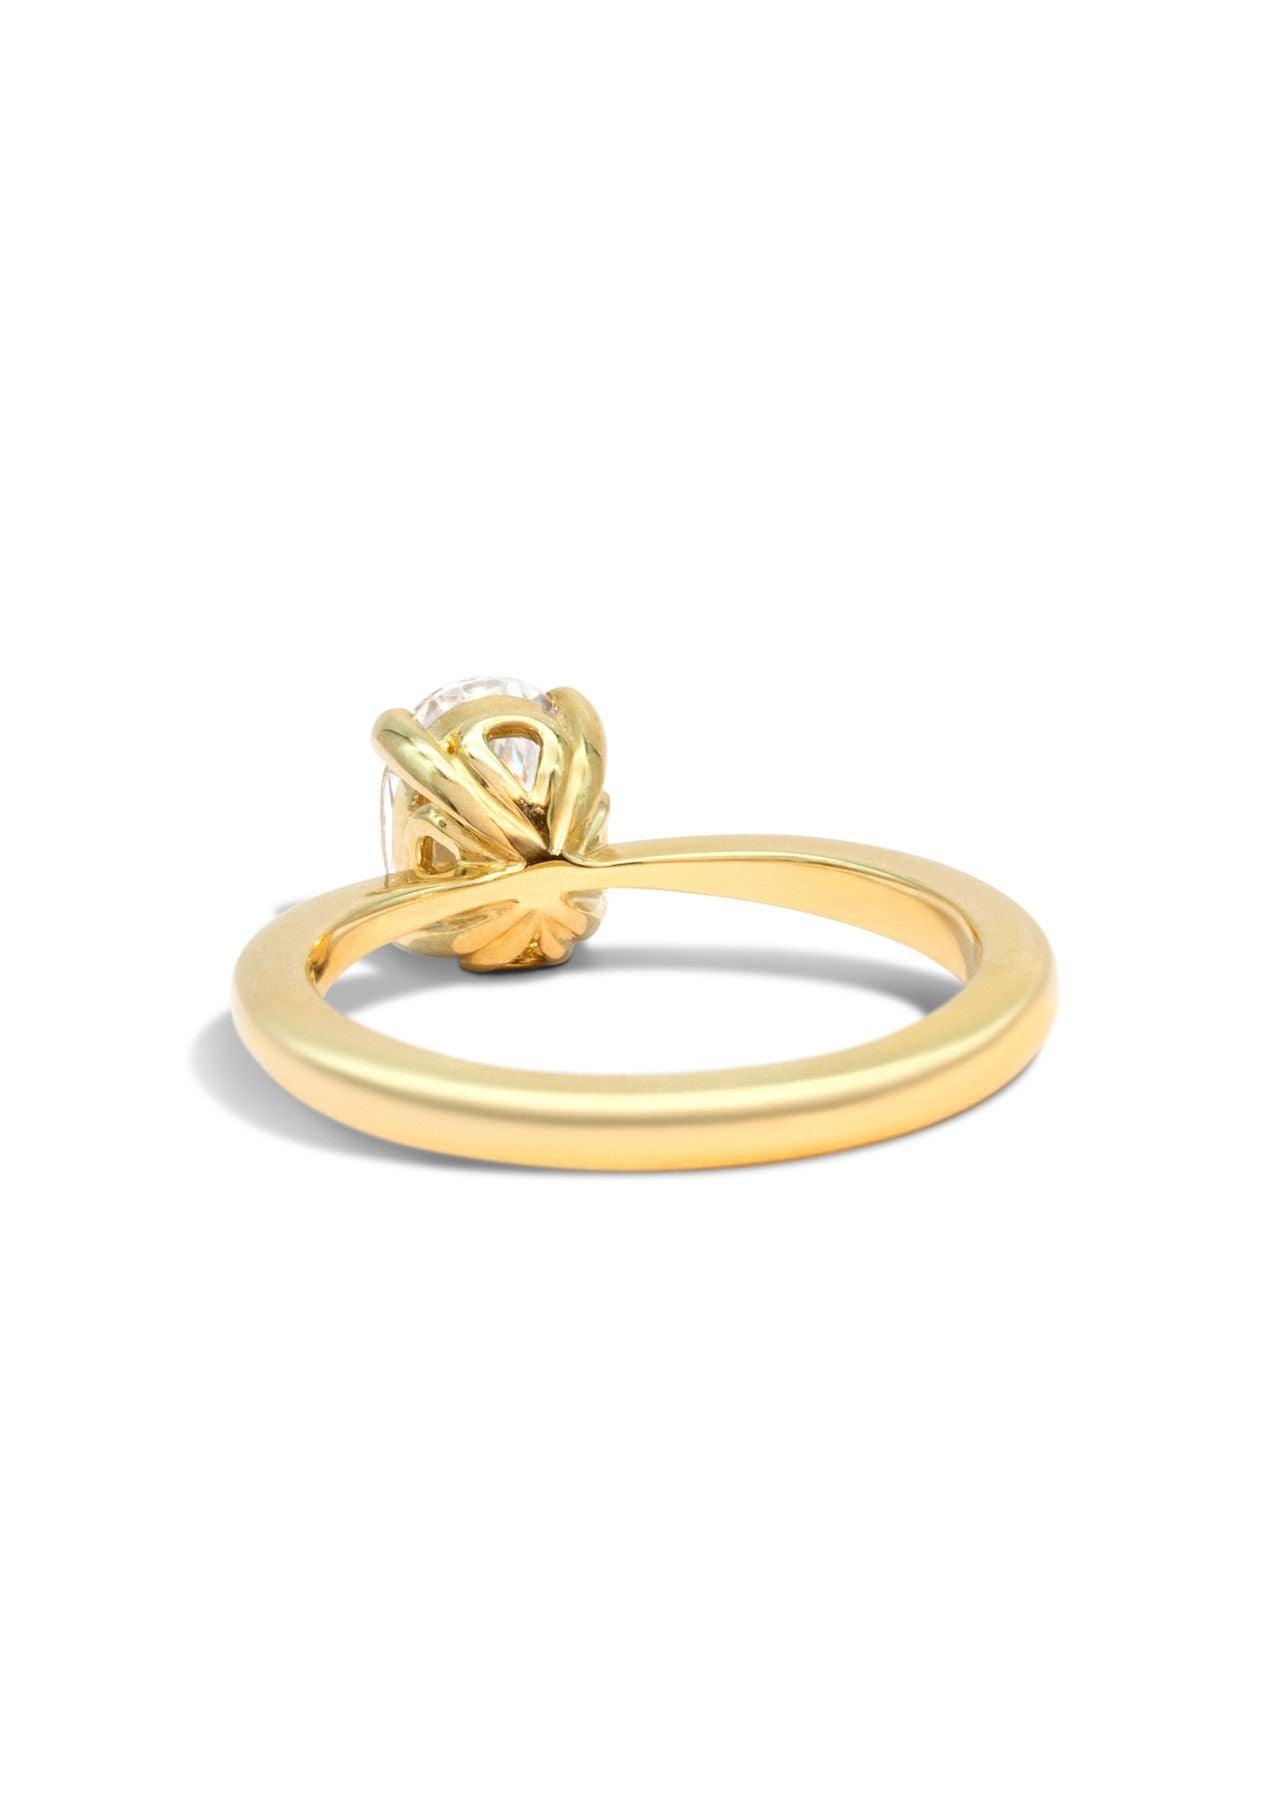 The June Yellow Gold Cultured Diamond Ring